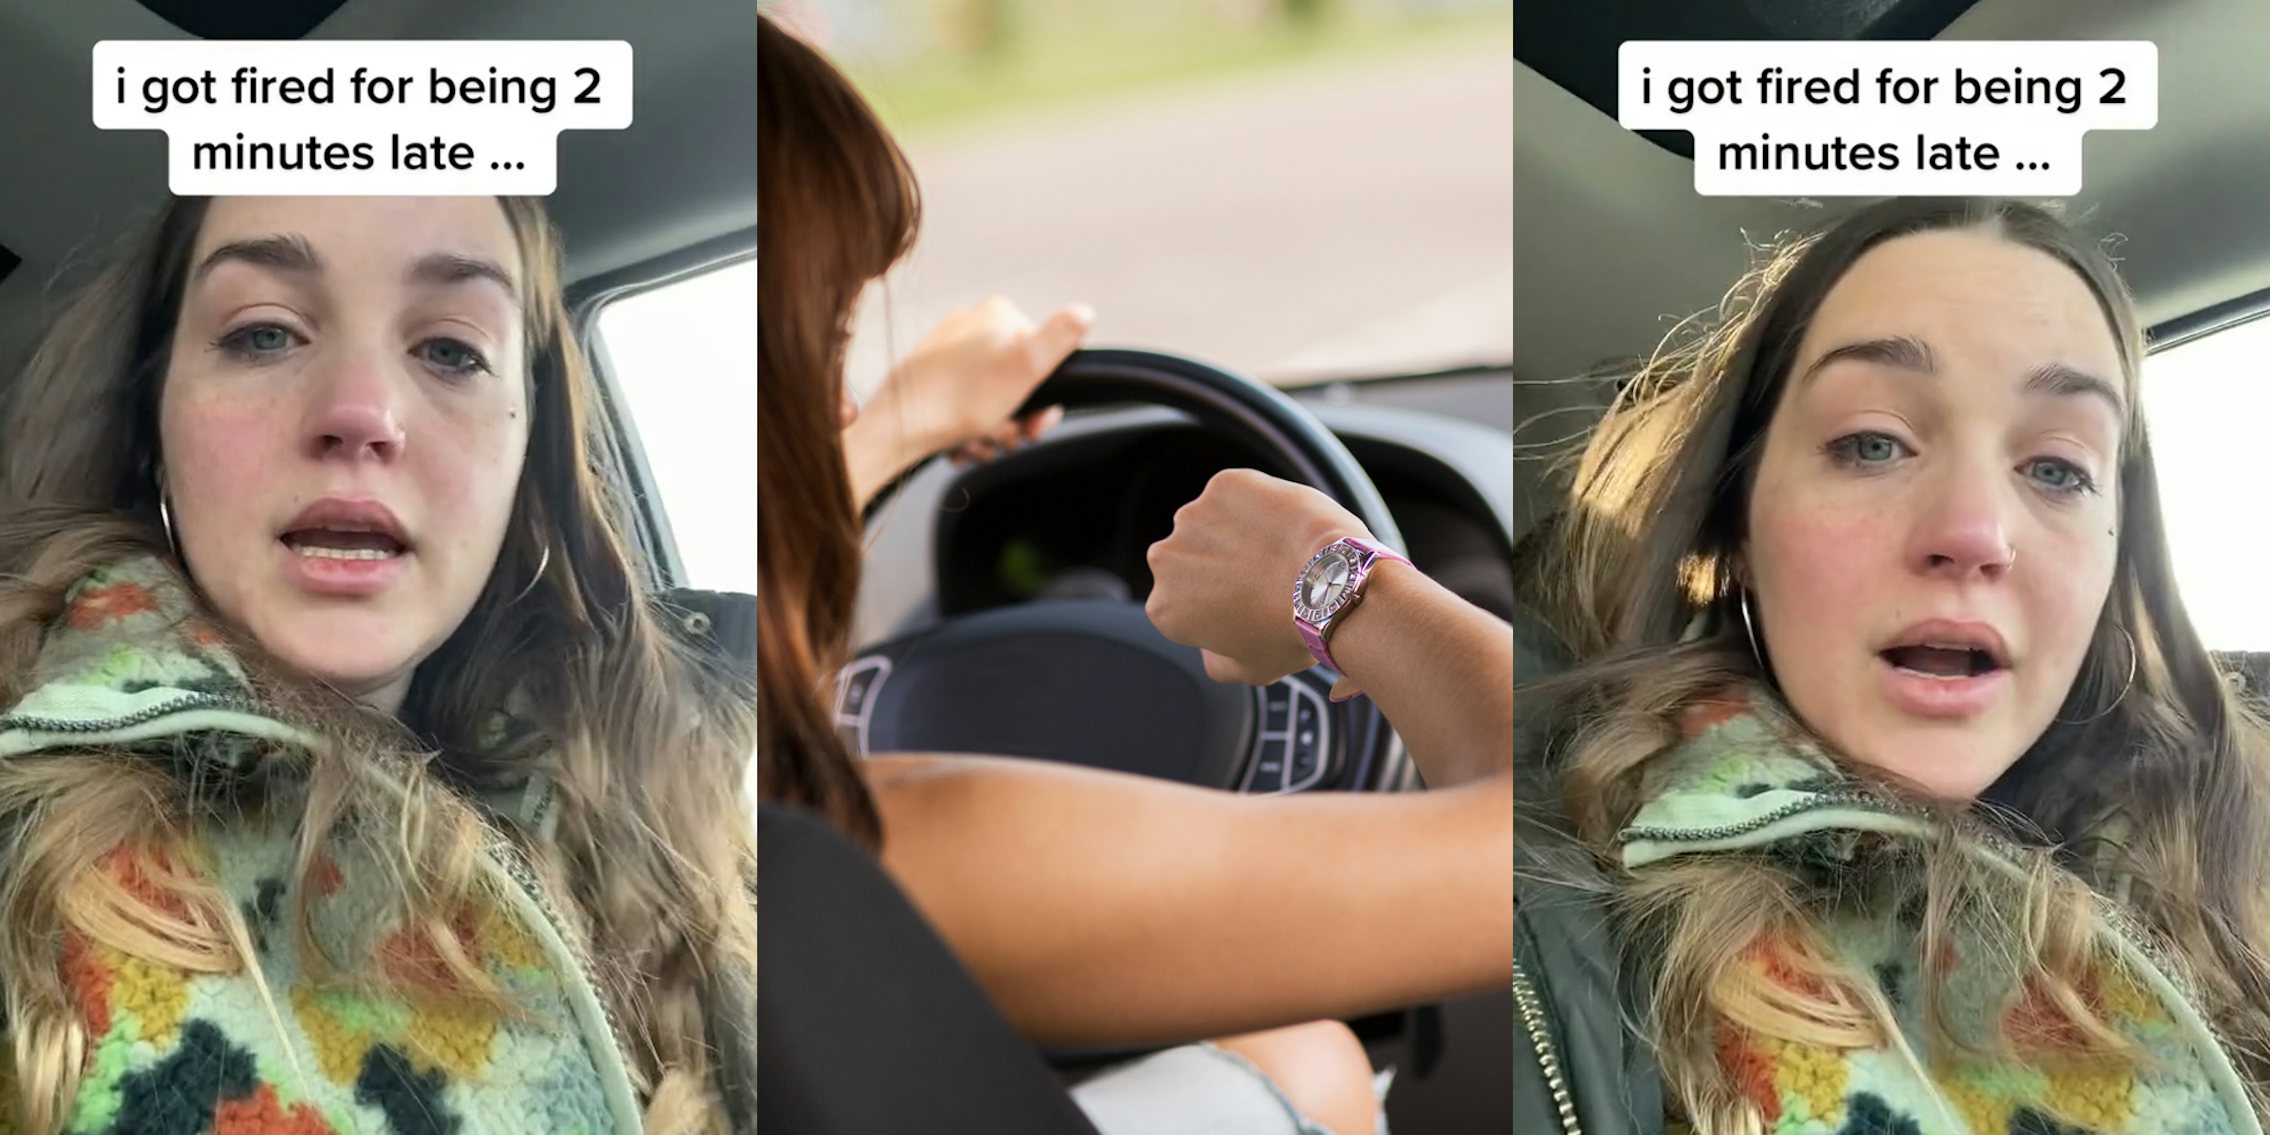 woman speaking in car with caption 'i got fired for being 2 minutes late...' (l) woman driving while checking time on watch (c) woman speaking in car with caption 'i got fired for being 2 minutes late...' (r)